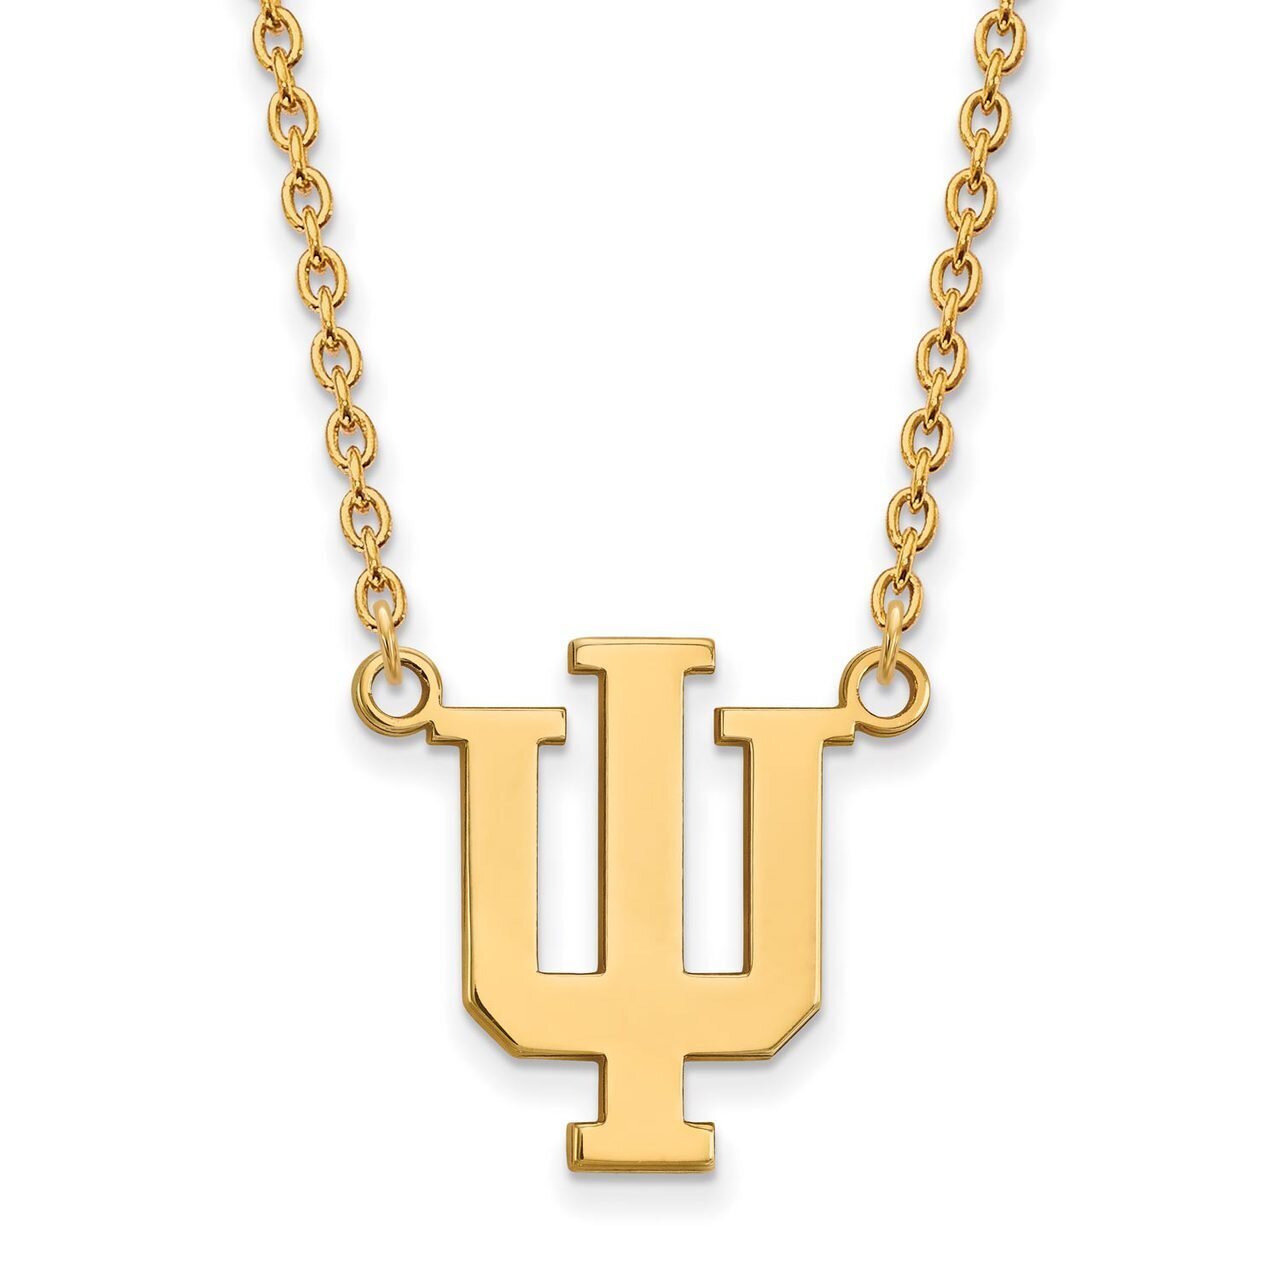 Indiana University Large Pendant with Chain Necklace 10k Yellow Gold 1Y016IU-18